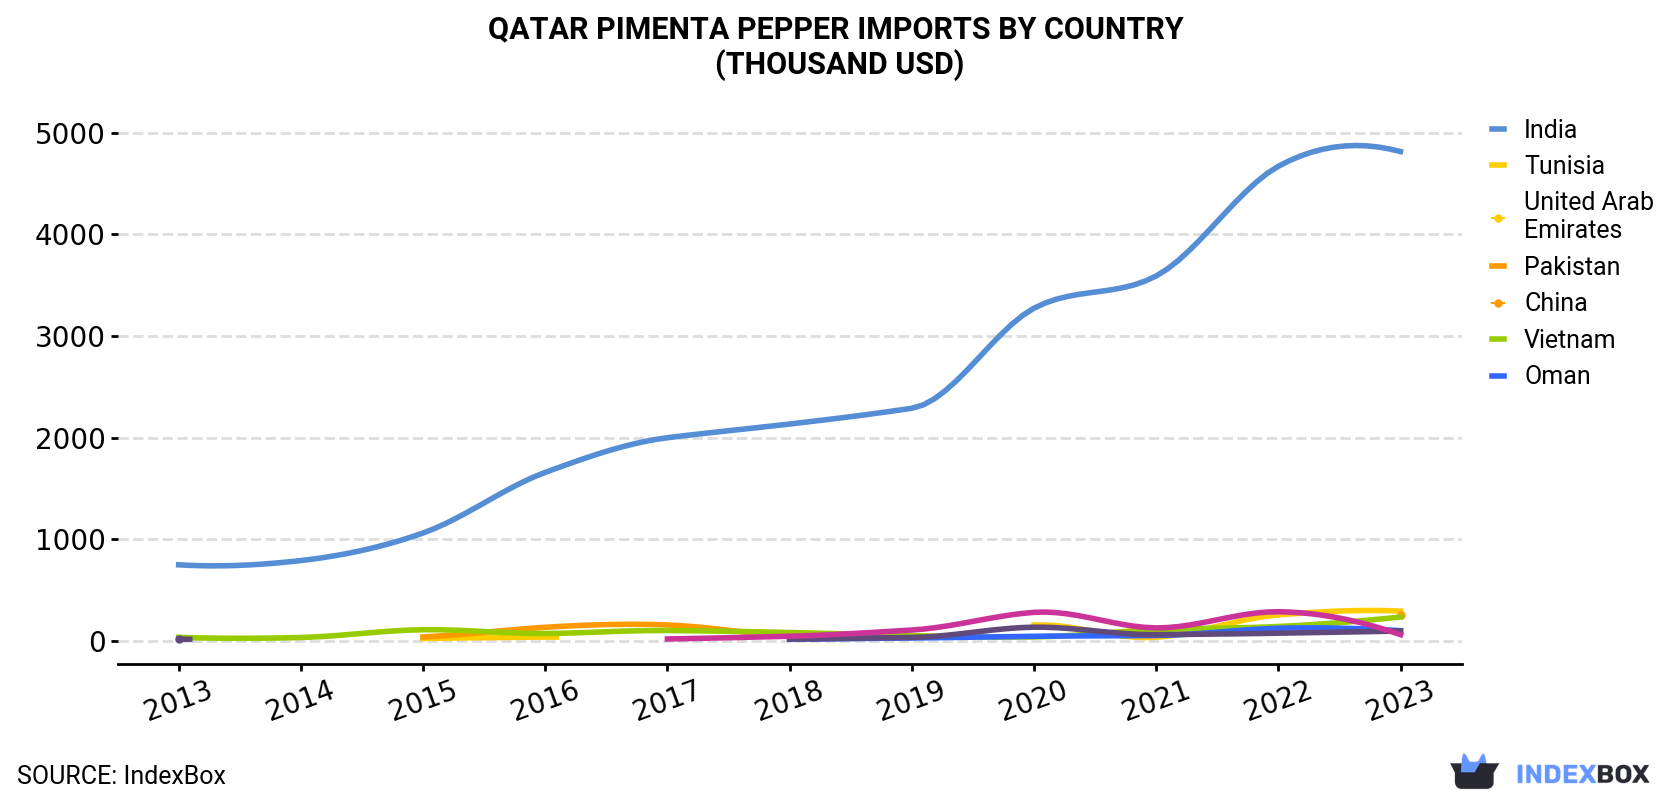 Qatar Pimenta Pepper Imports By Country (Thousand USD)